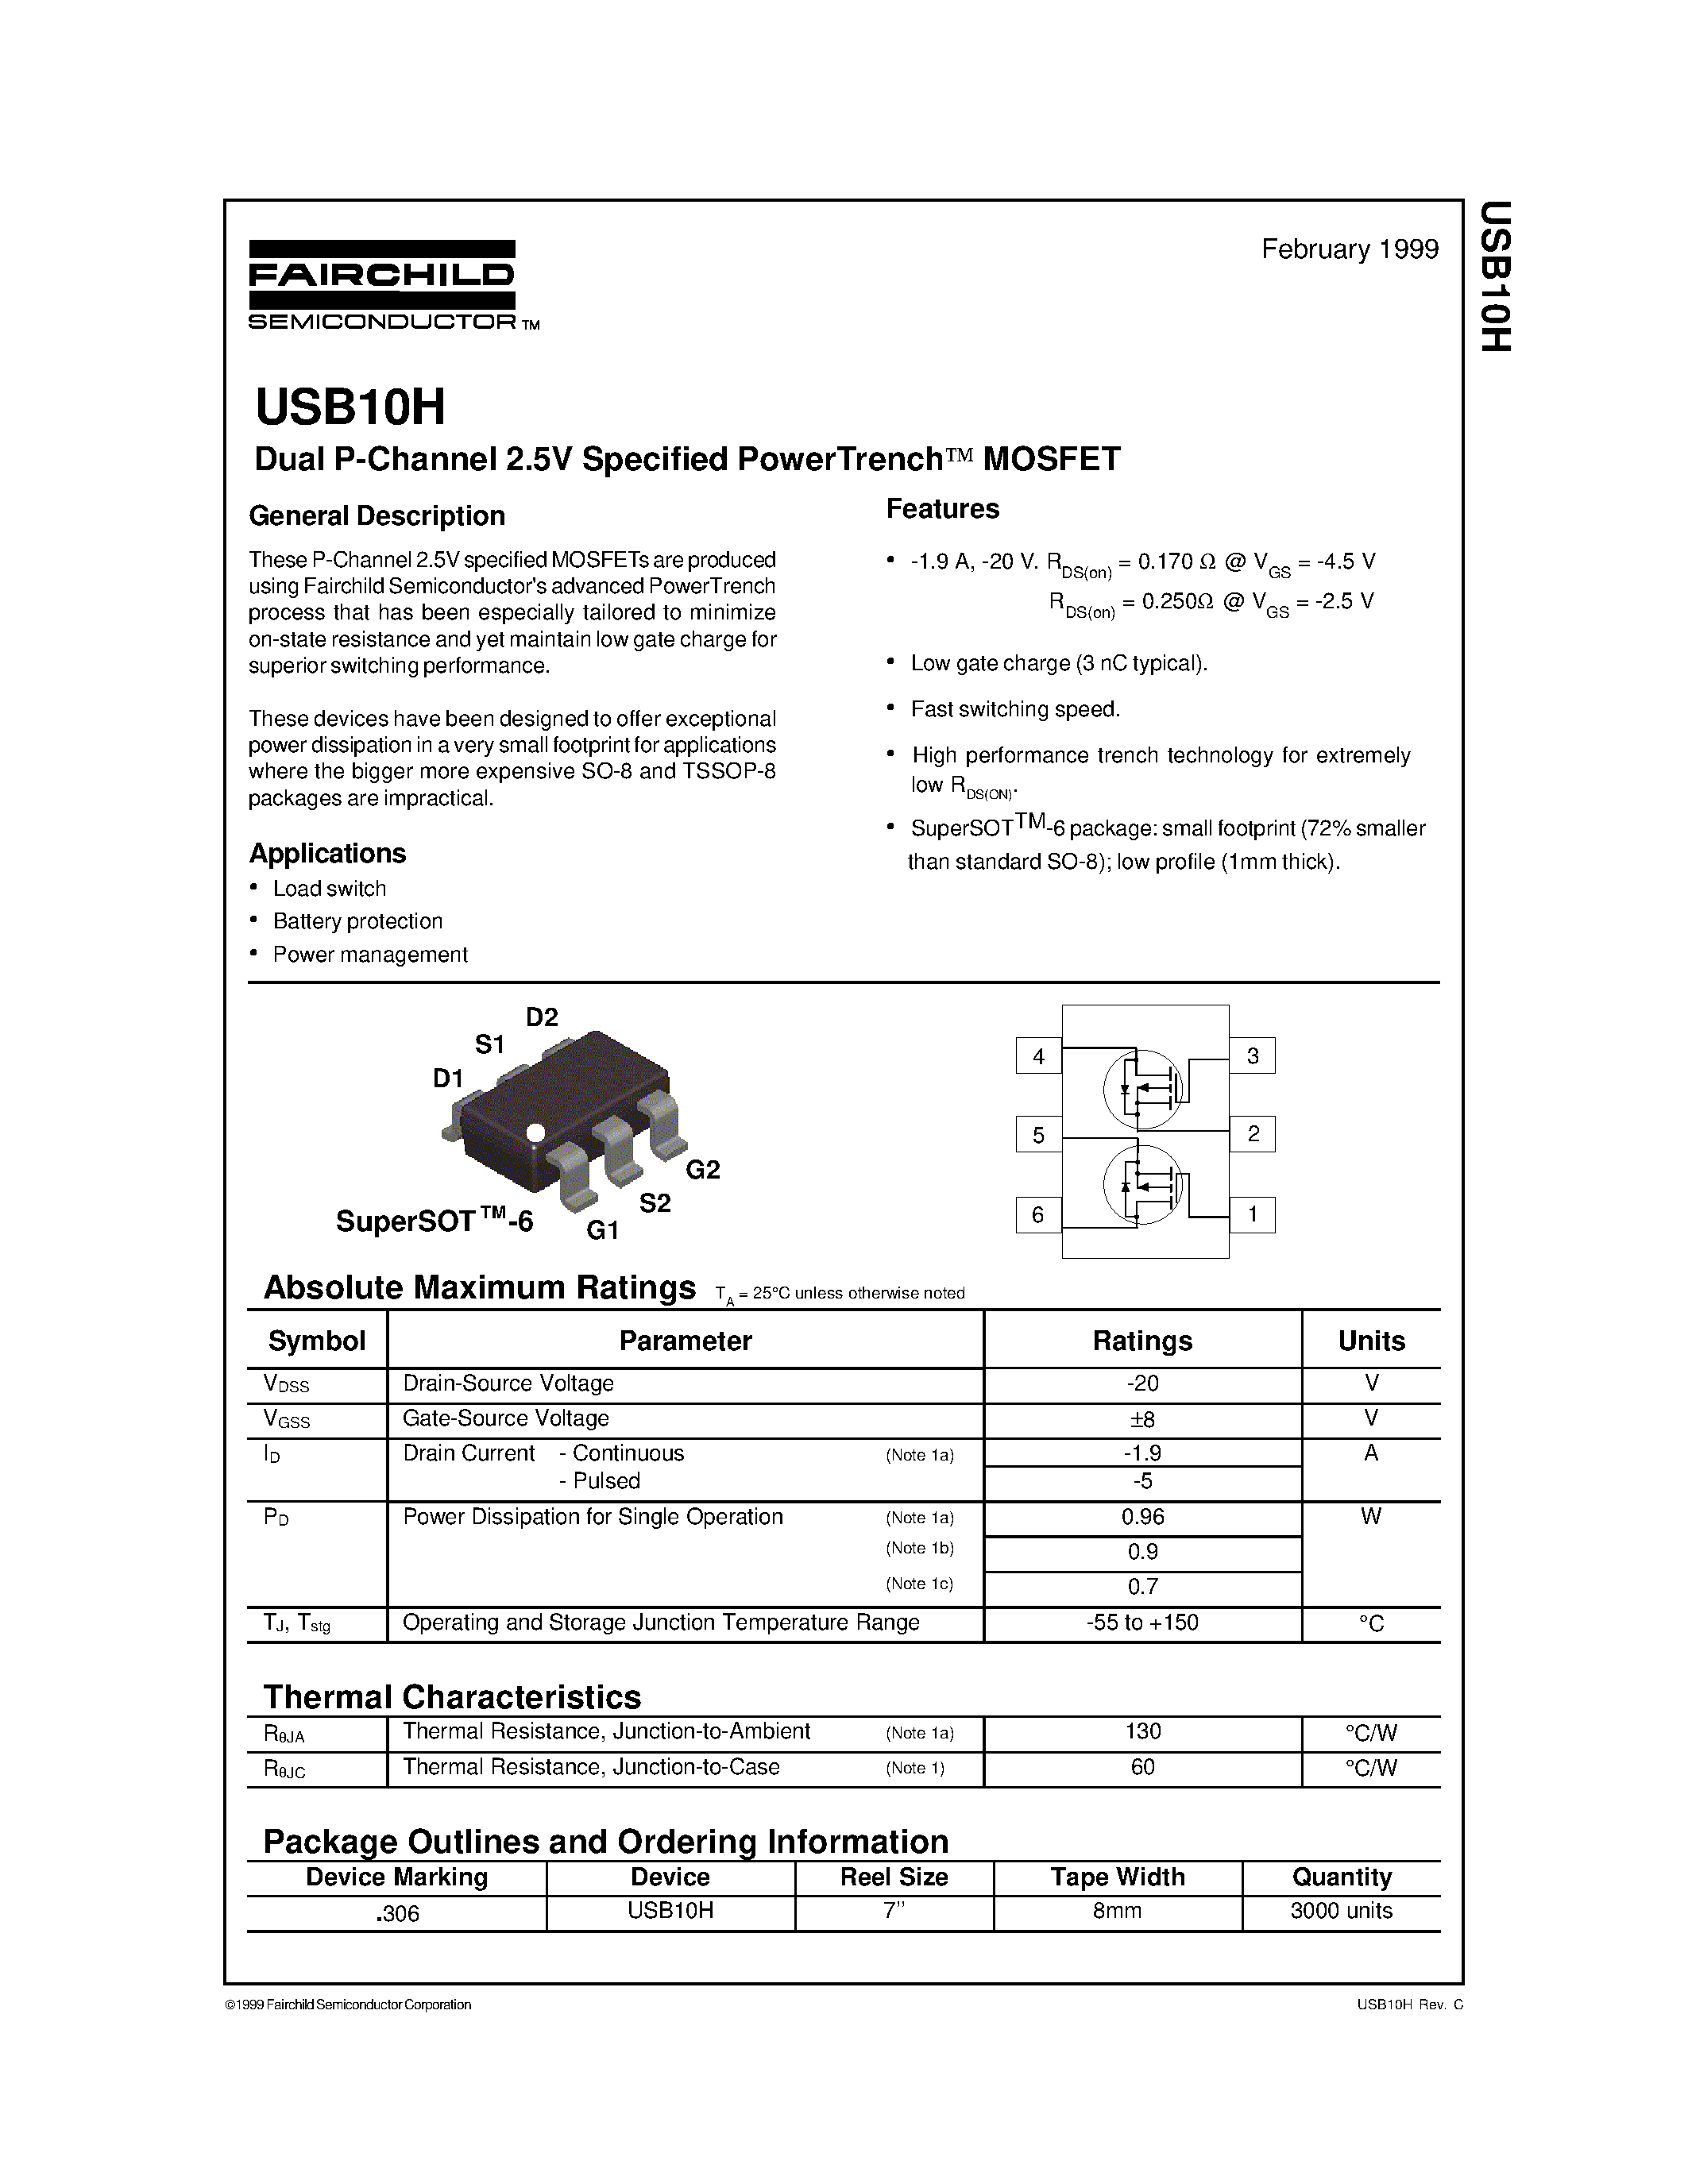 Datasheet USB10H - Dual P-Channel 2.5V Specified PowerTrench MOSFET page 1